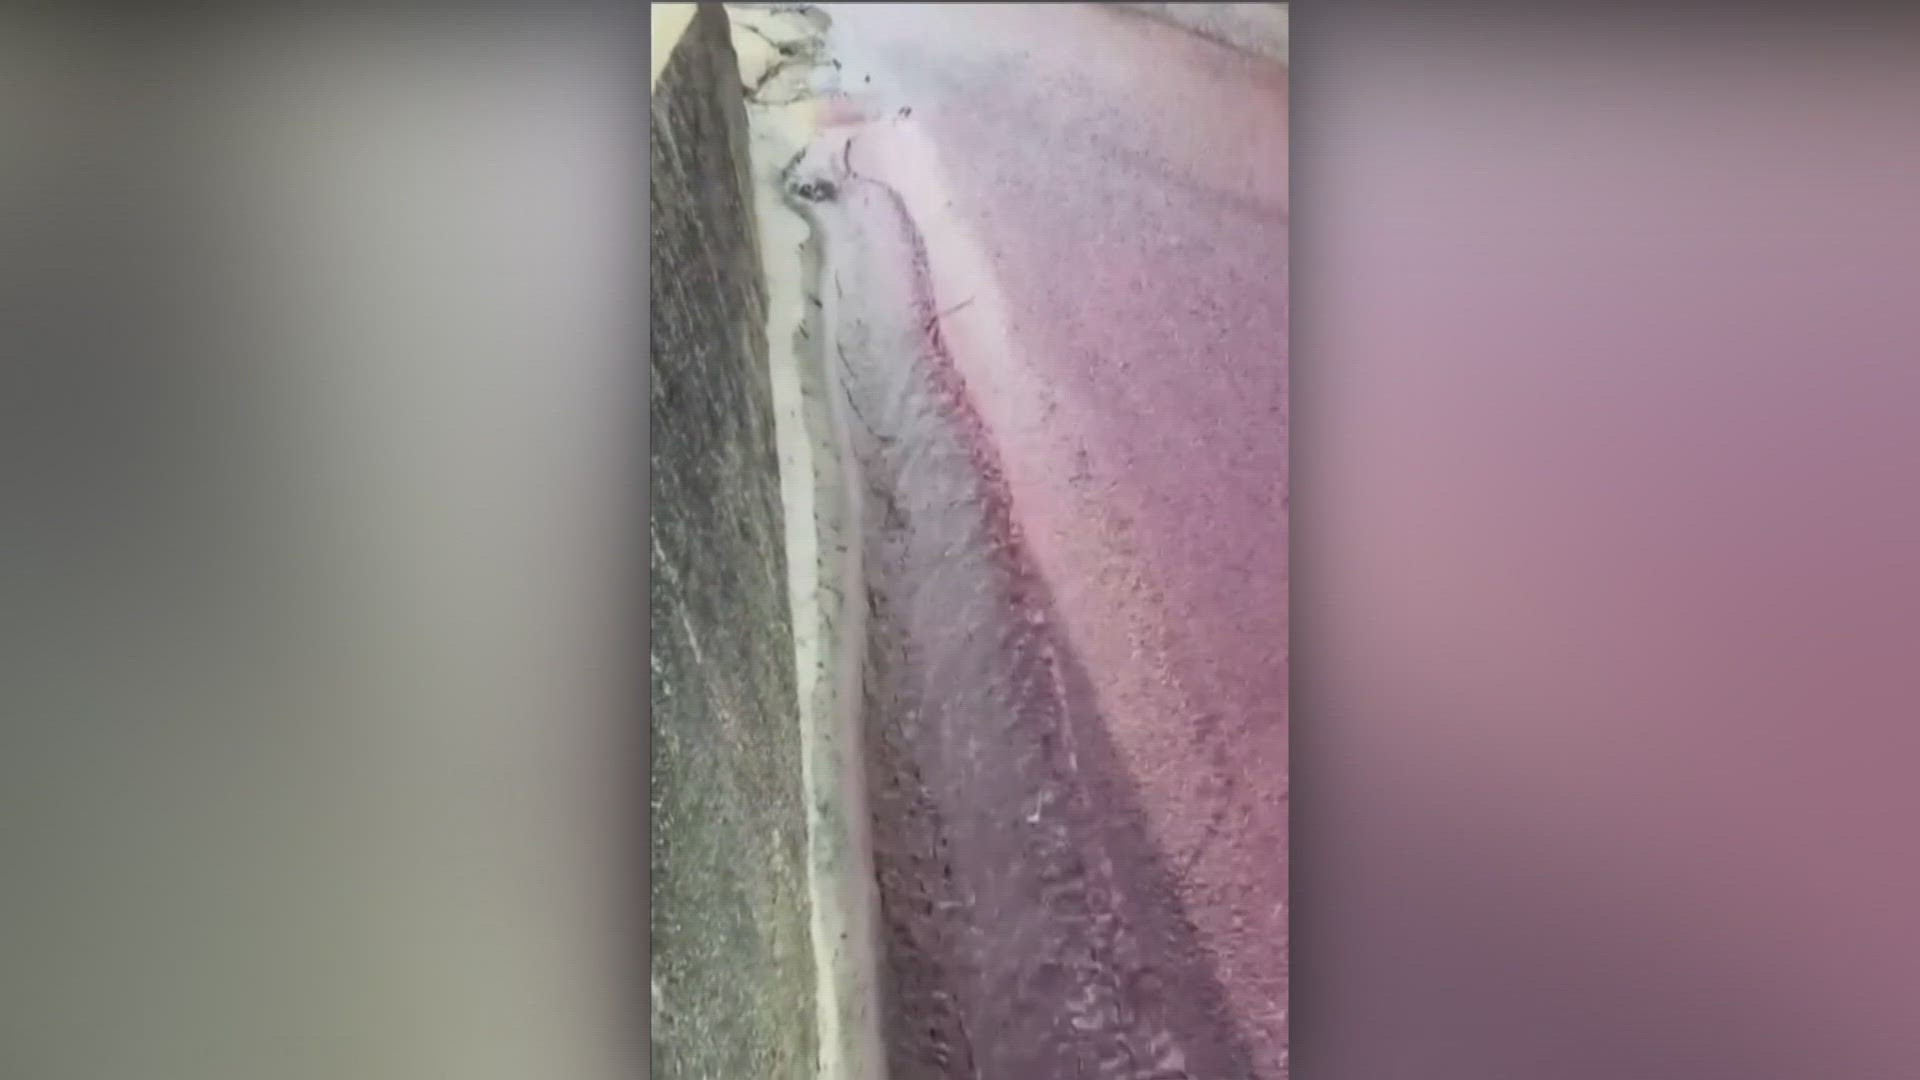 Two tanks of wine at a local distillery spilled into the streets.